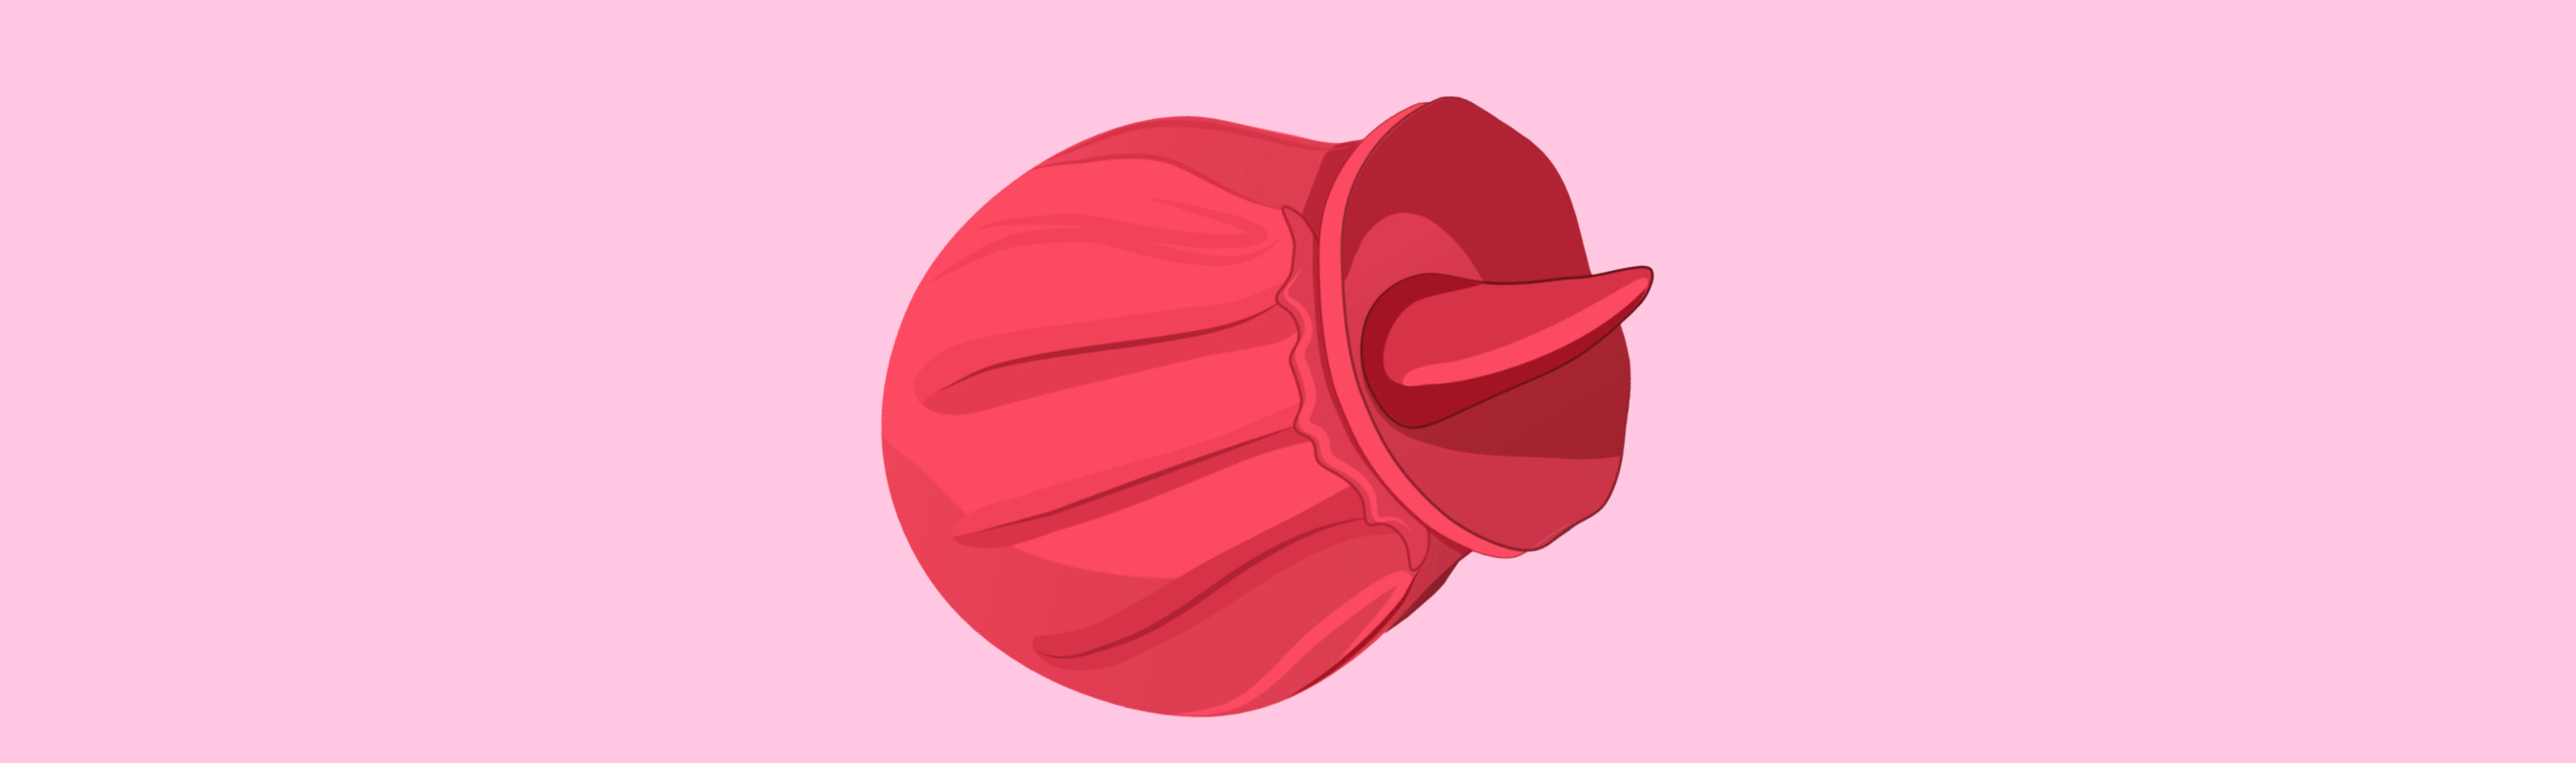 Illustration of red tongue vibrator in the shape of a rose